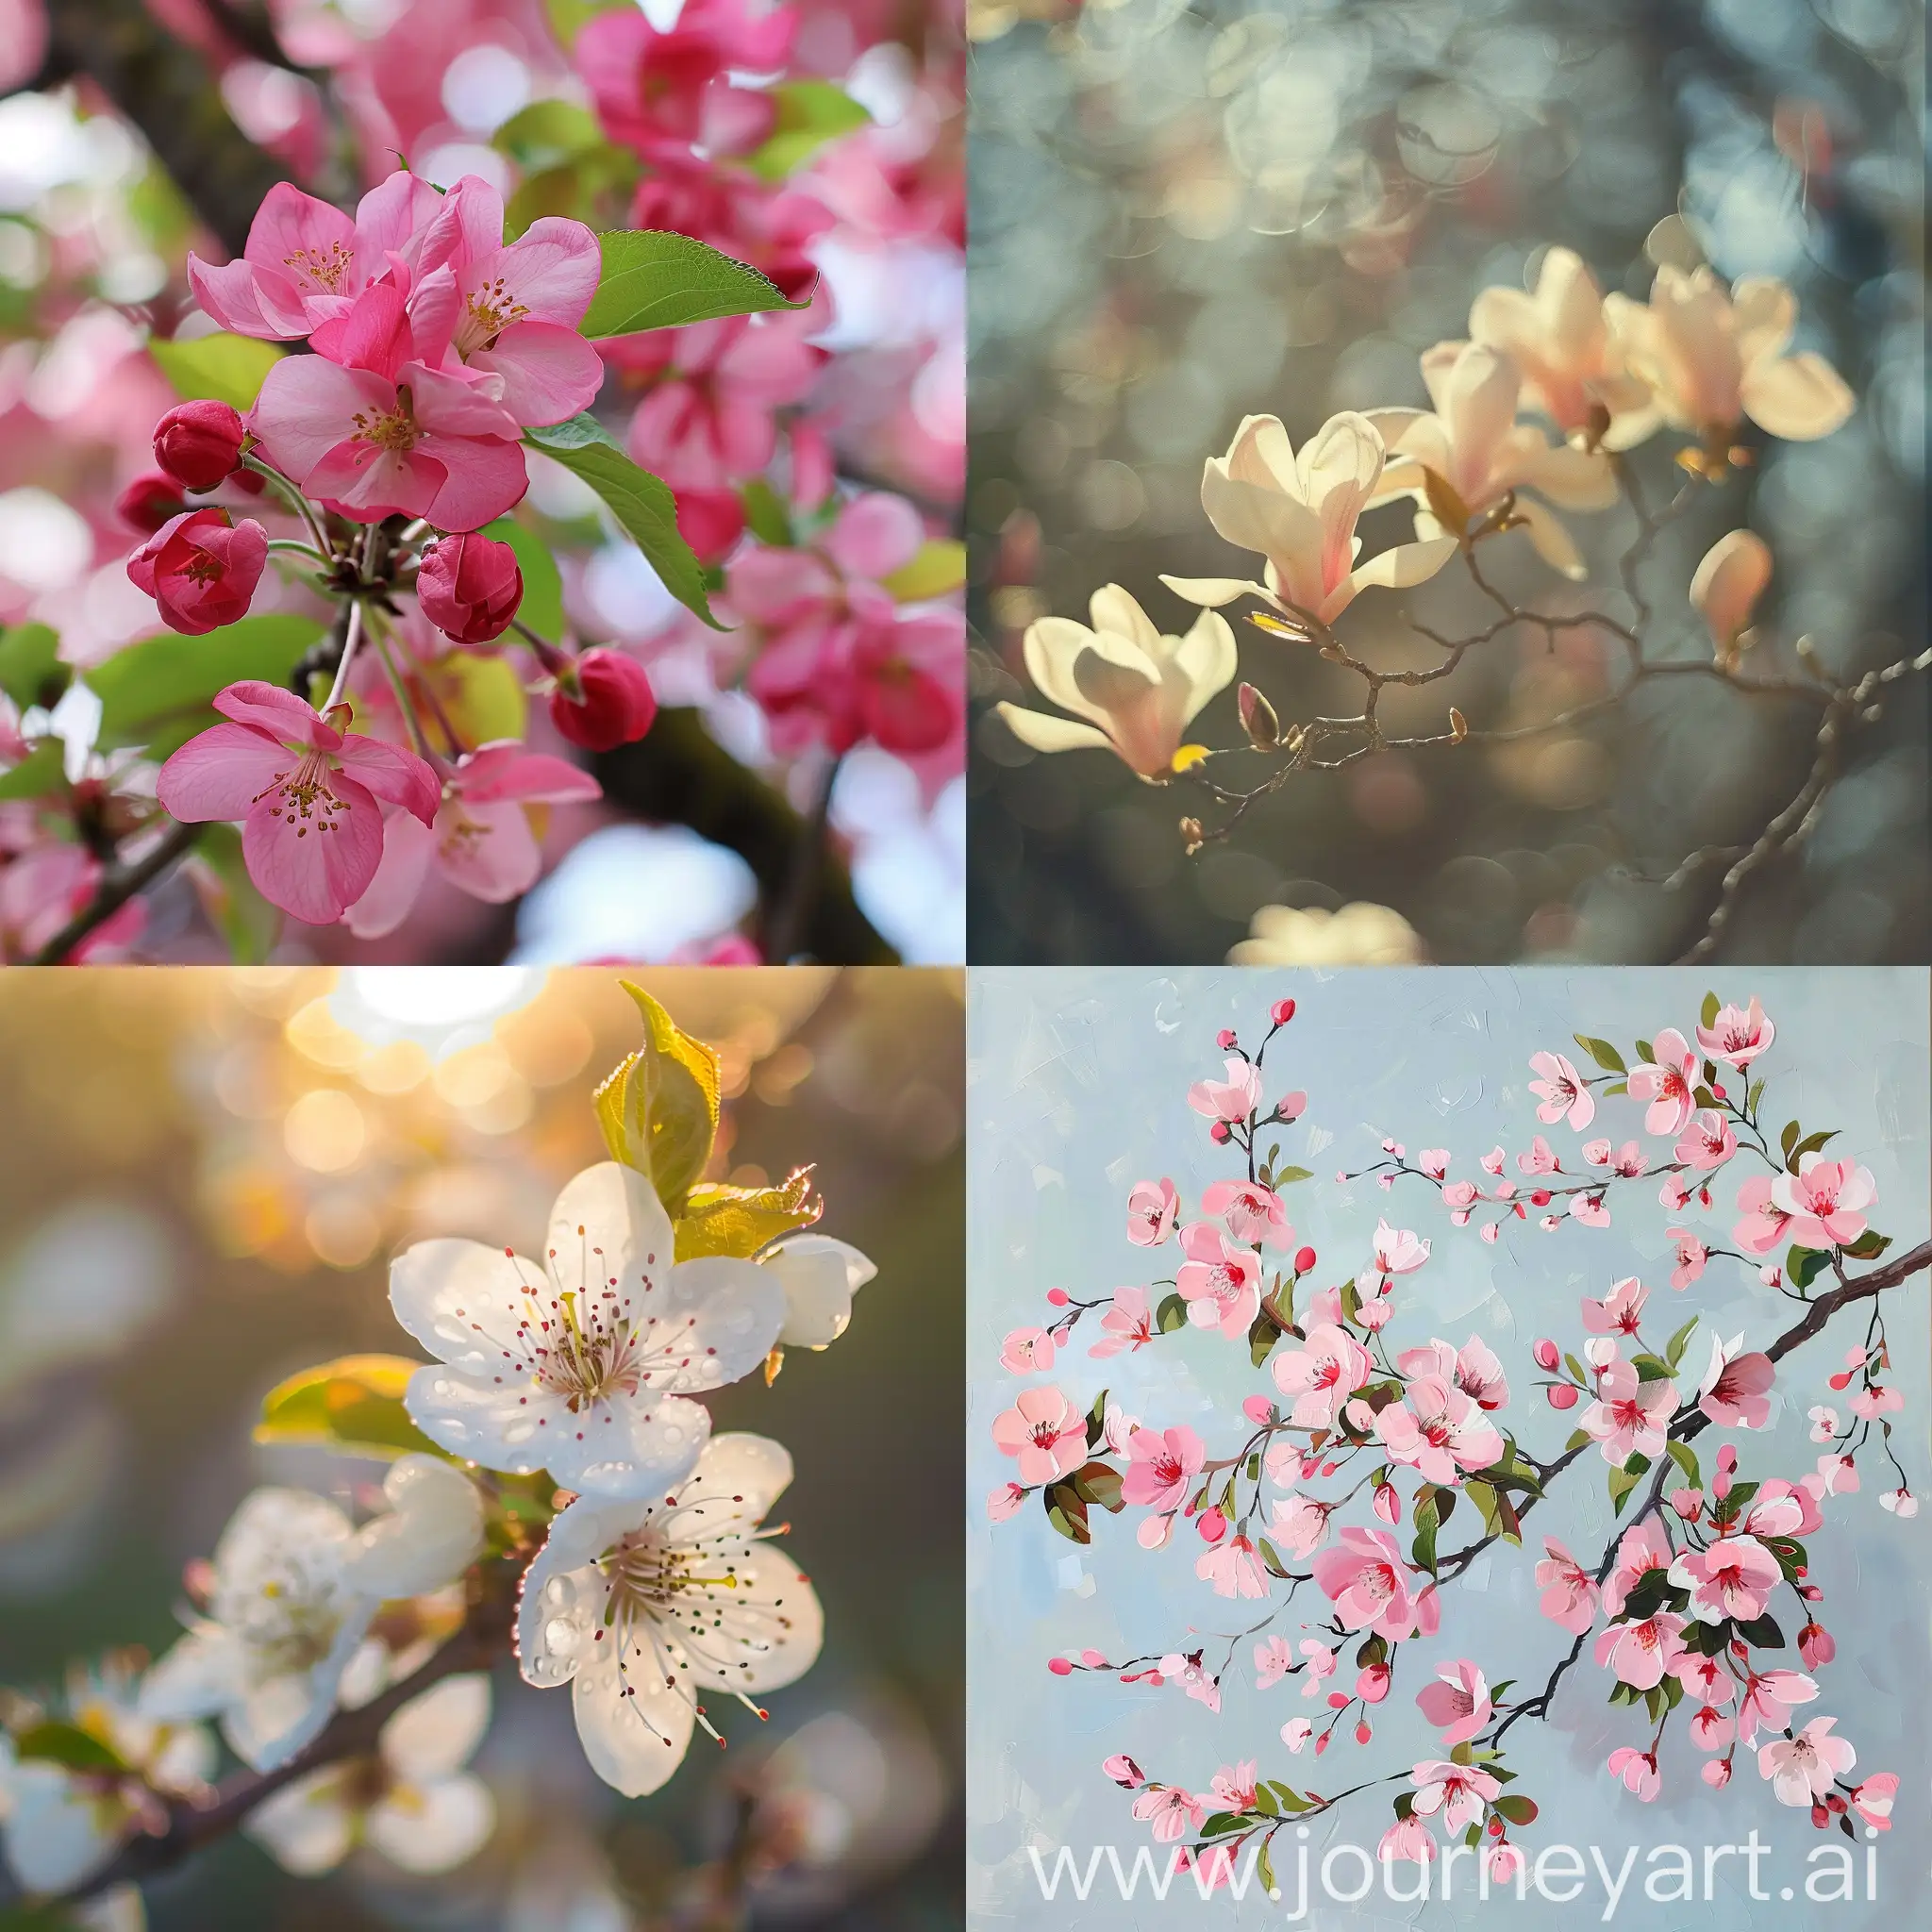 Vibrant-Spring-Blossoms-in-a-11-Aspect-Ratio-Image-23592